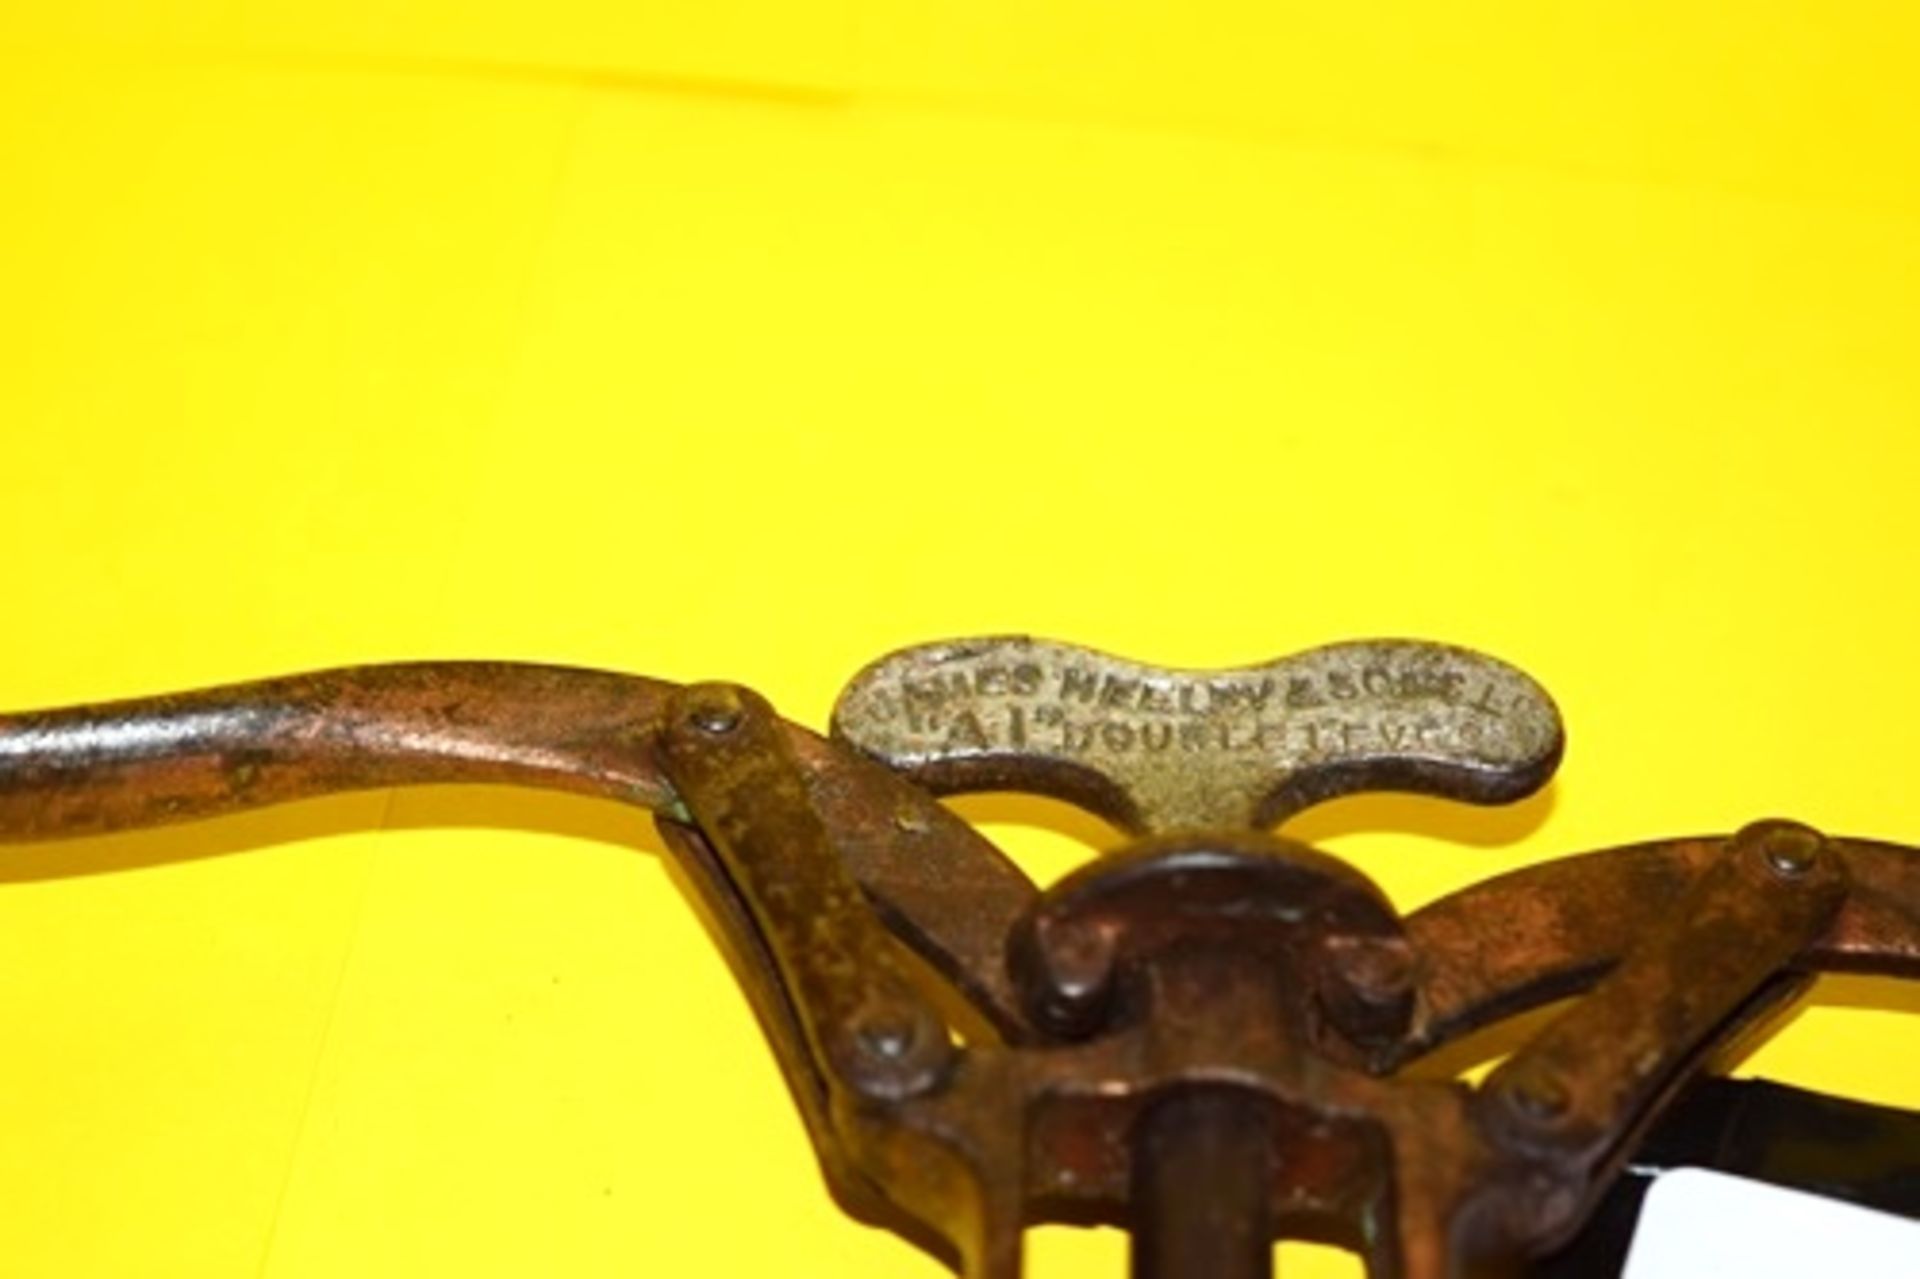 James Healey & Sons A1 double lever corkscrew, with traces of copper wash and helical worm helix, - Image 2 of 2